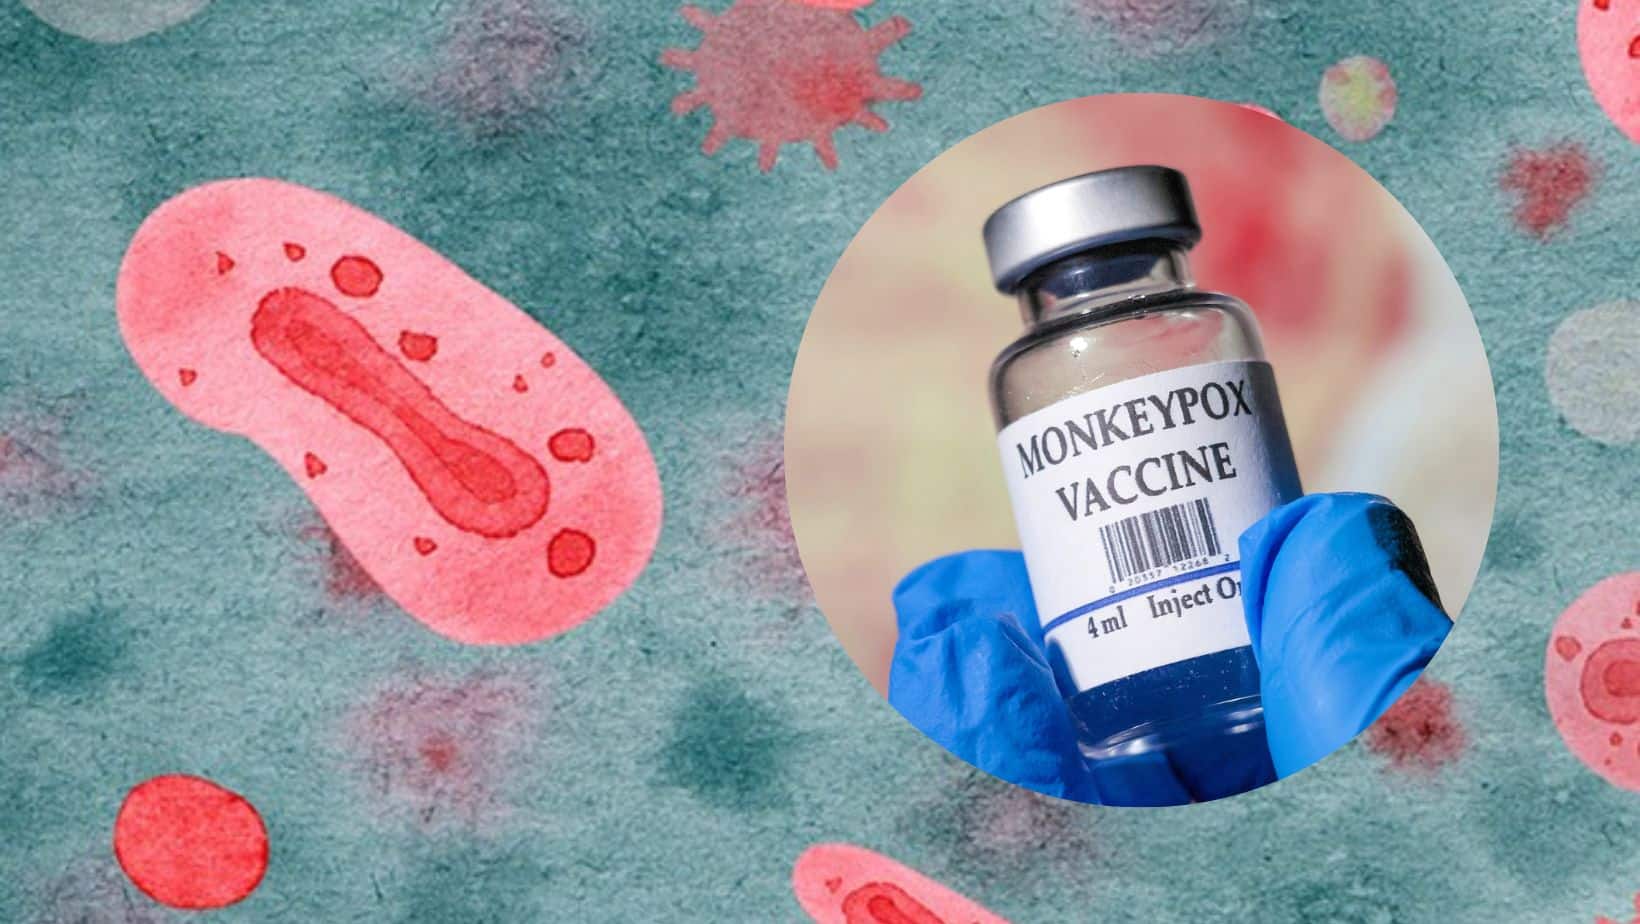 Monkeypox Vaccine Is Not 100% Effective, WHO Advices People To Continue Taking Precautions